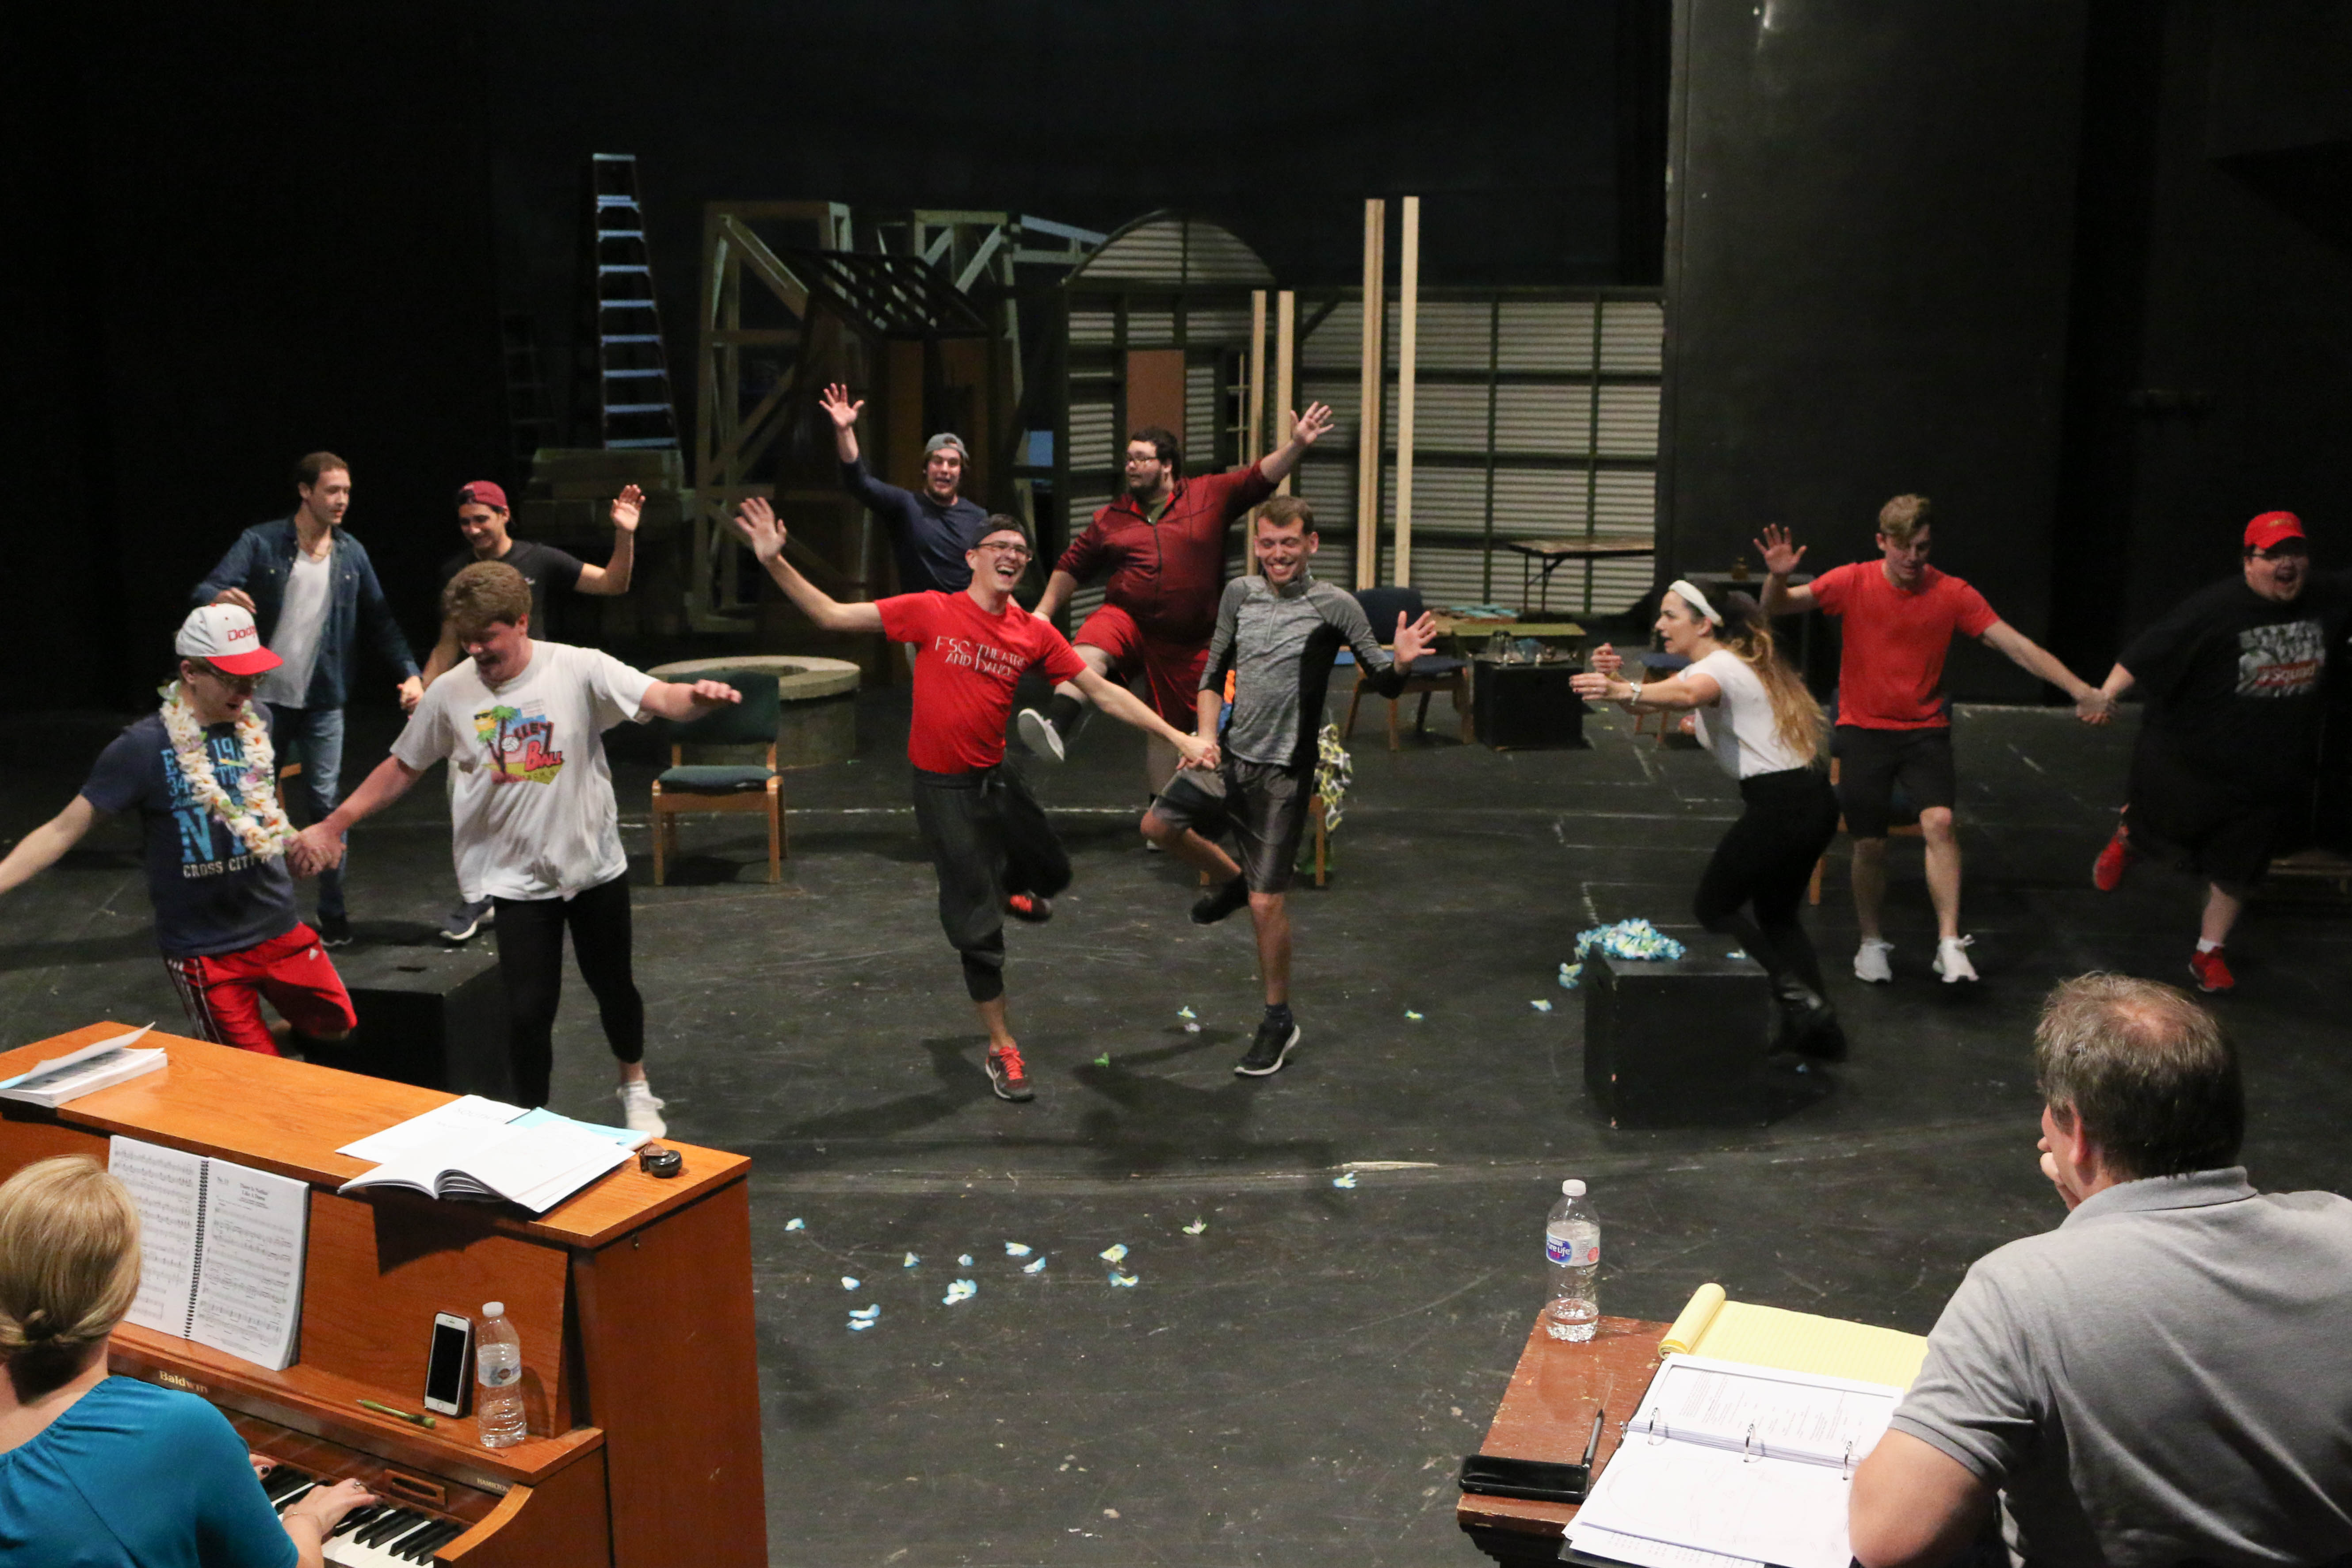 Theatre students are rehearsing for South Pacific musical